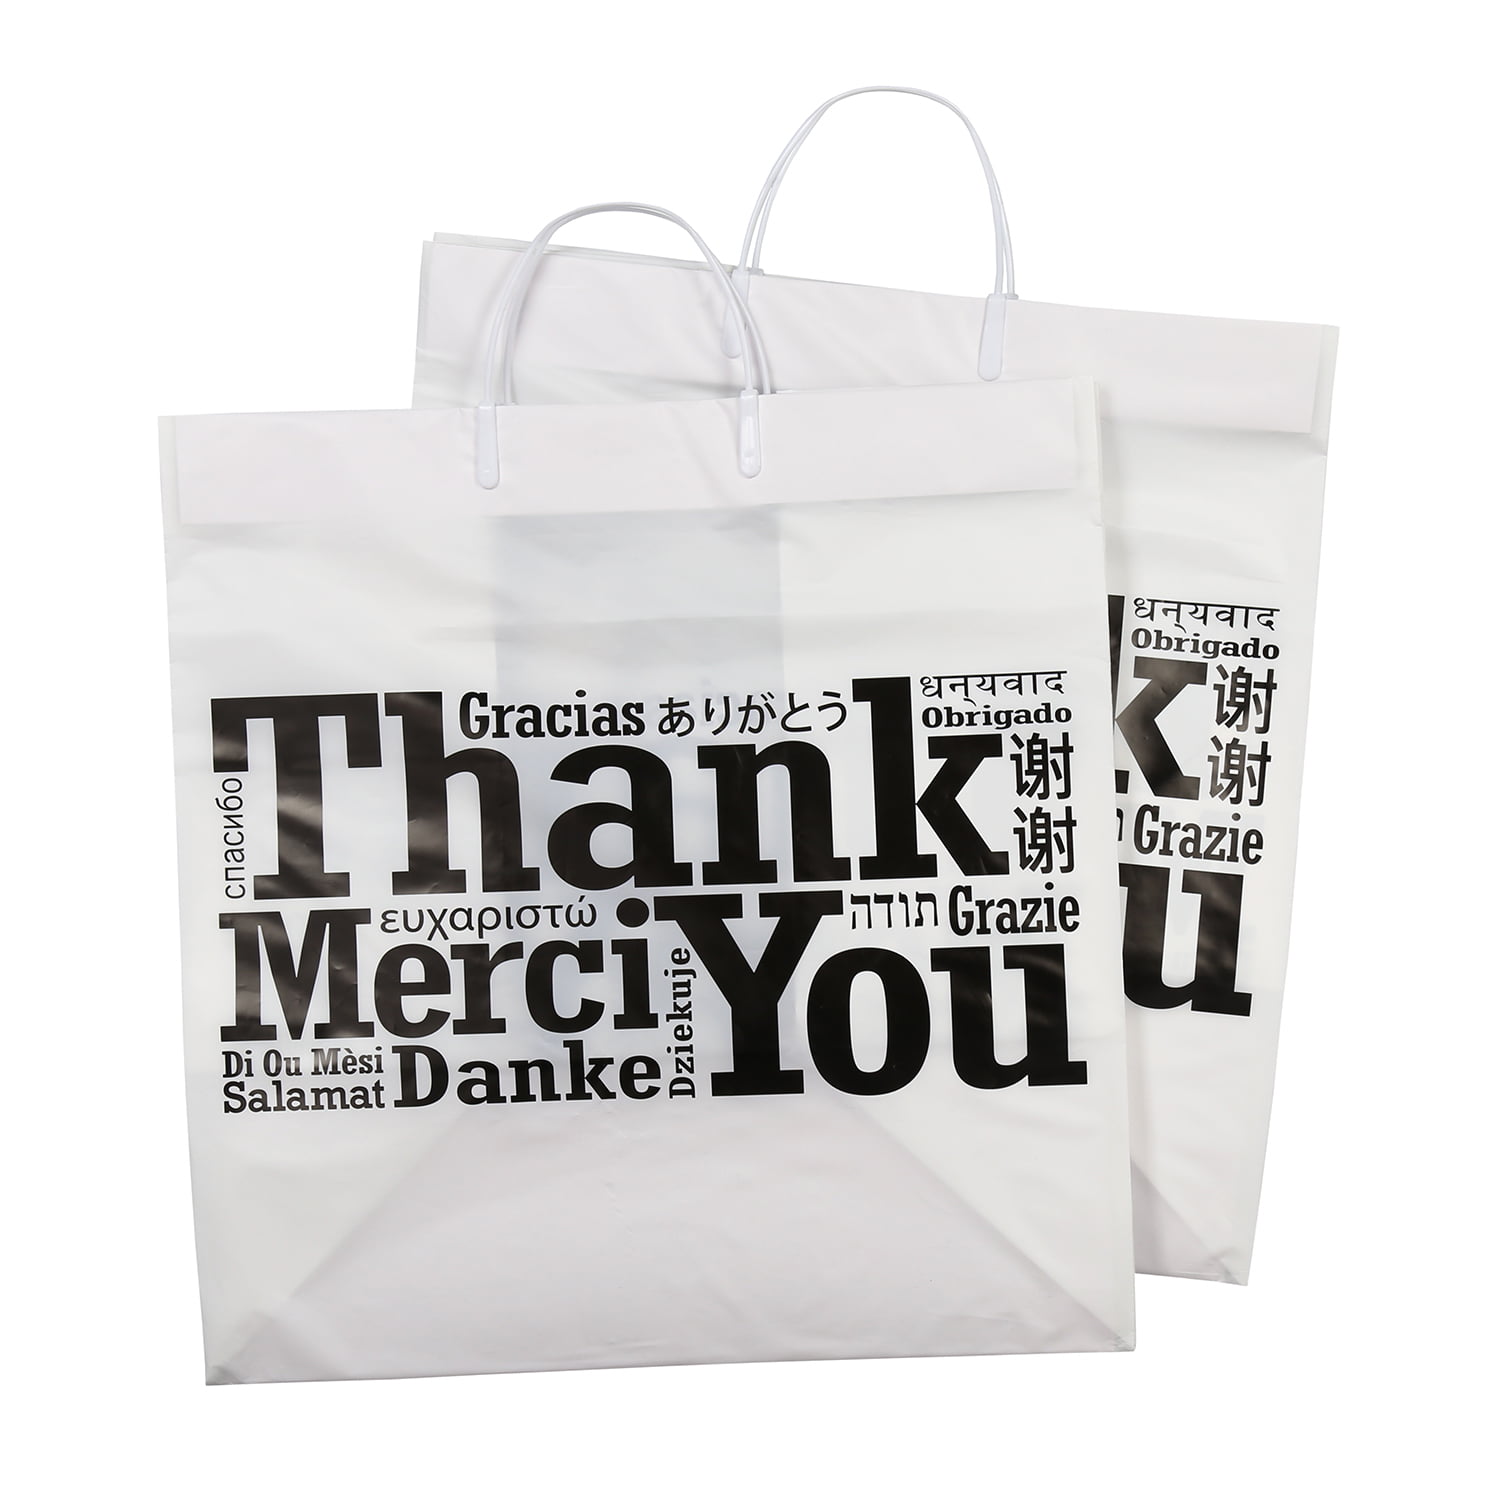 Royal Plastic Shopping Bags with Flat Bottoms, 11.5 x 10.5 x 19,  Multilingual Thank You Print, Case of 250 